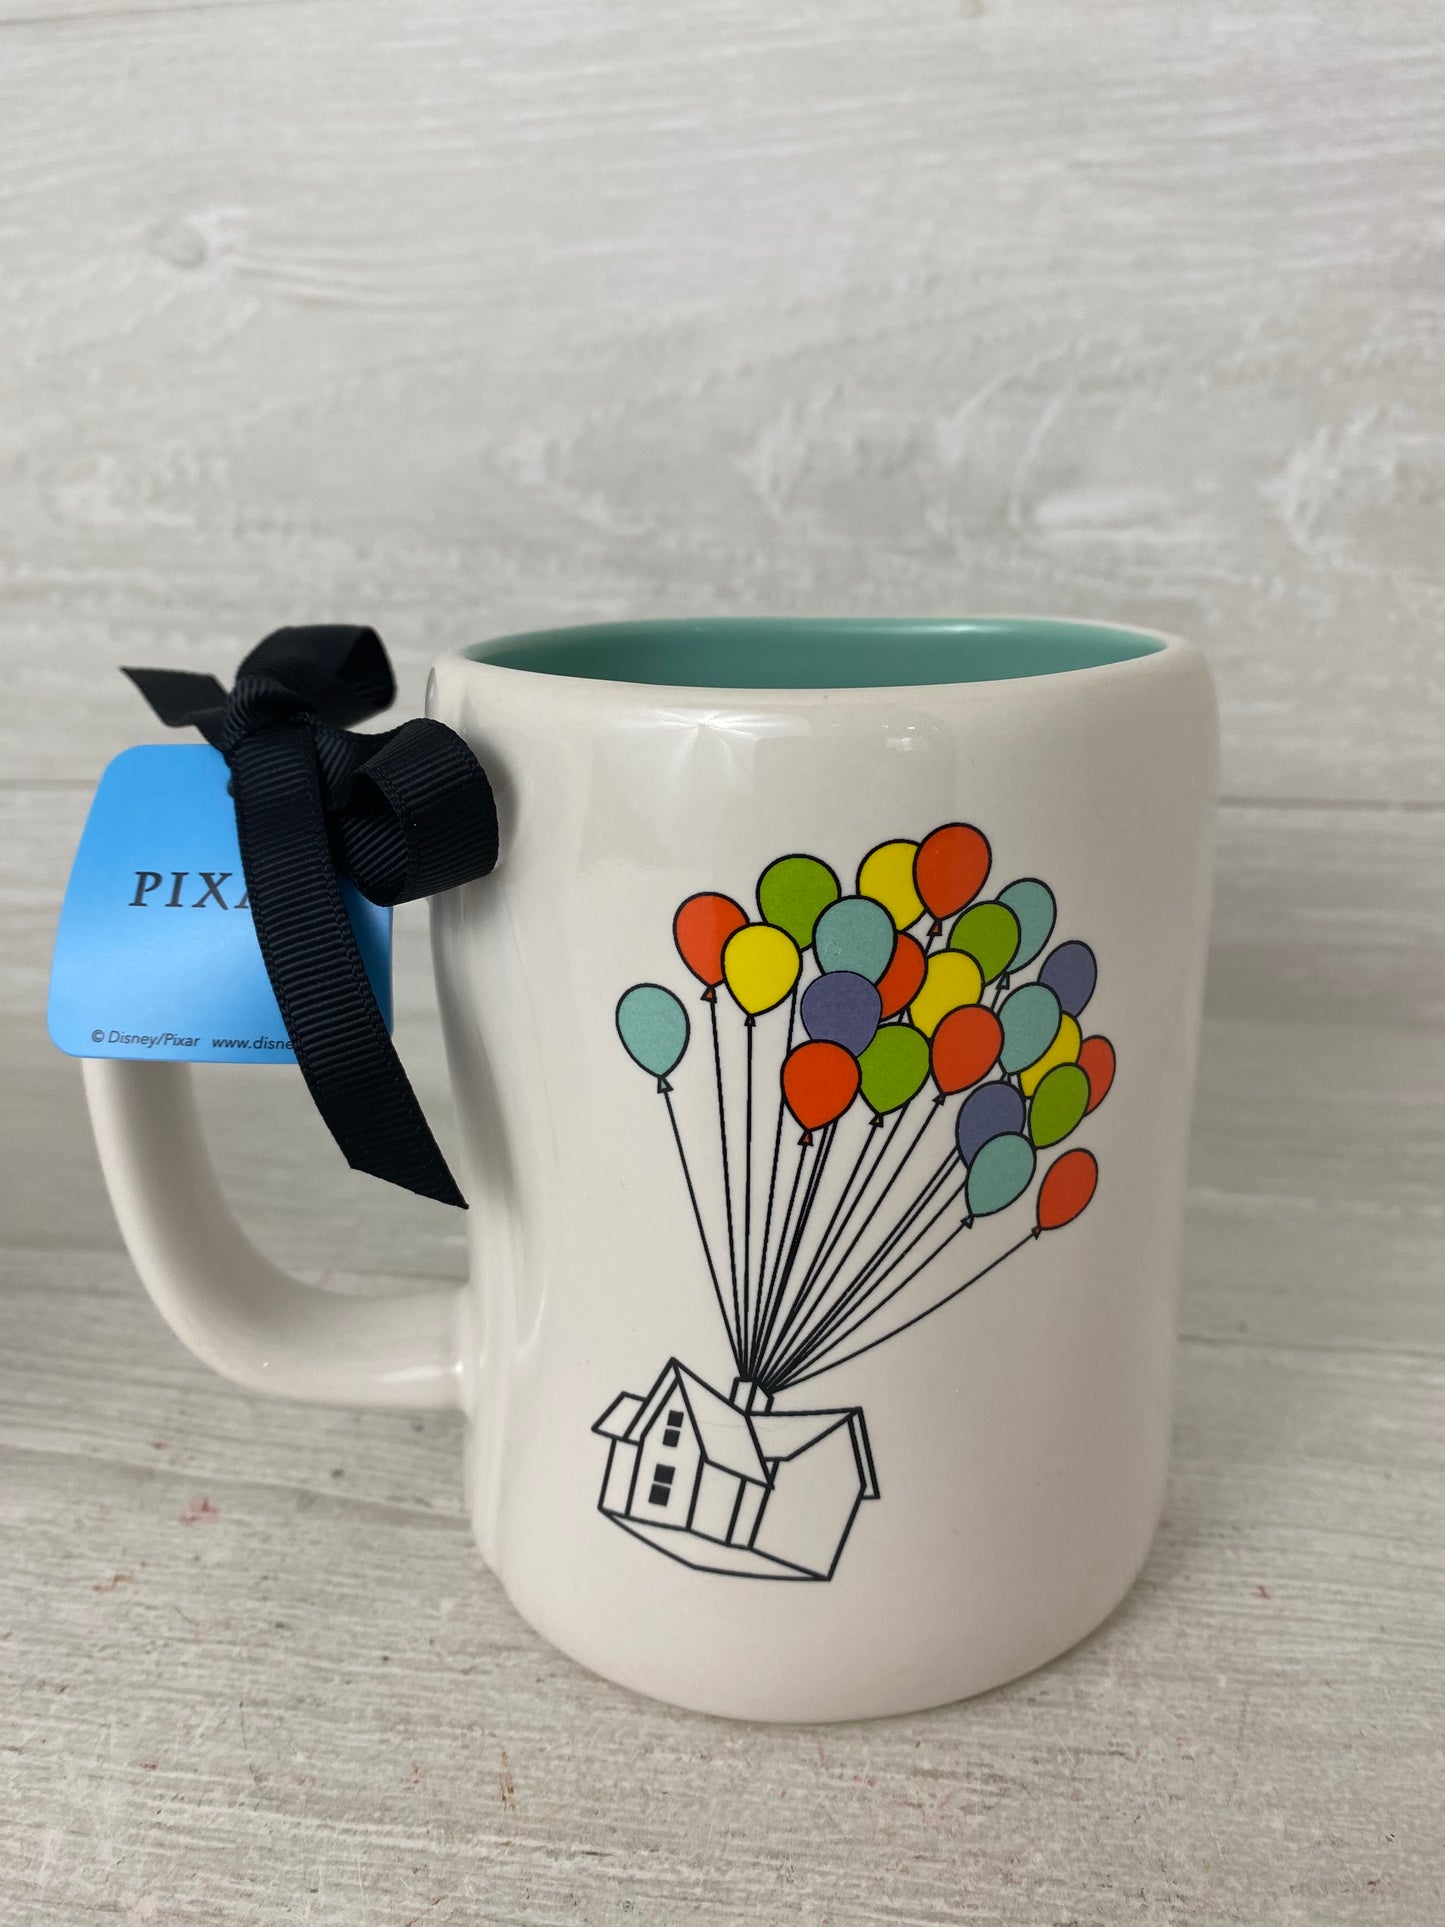 Rae Dunn Up "Adventure Is Out There" Mug